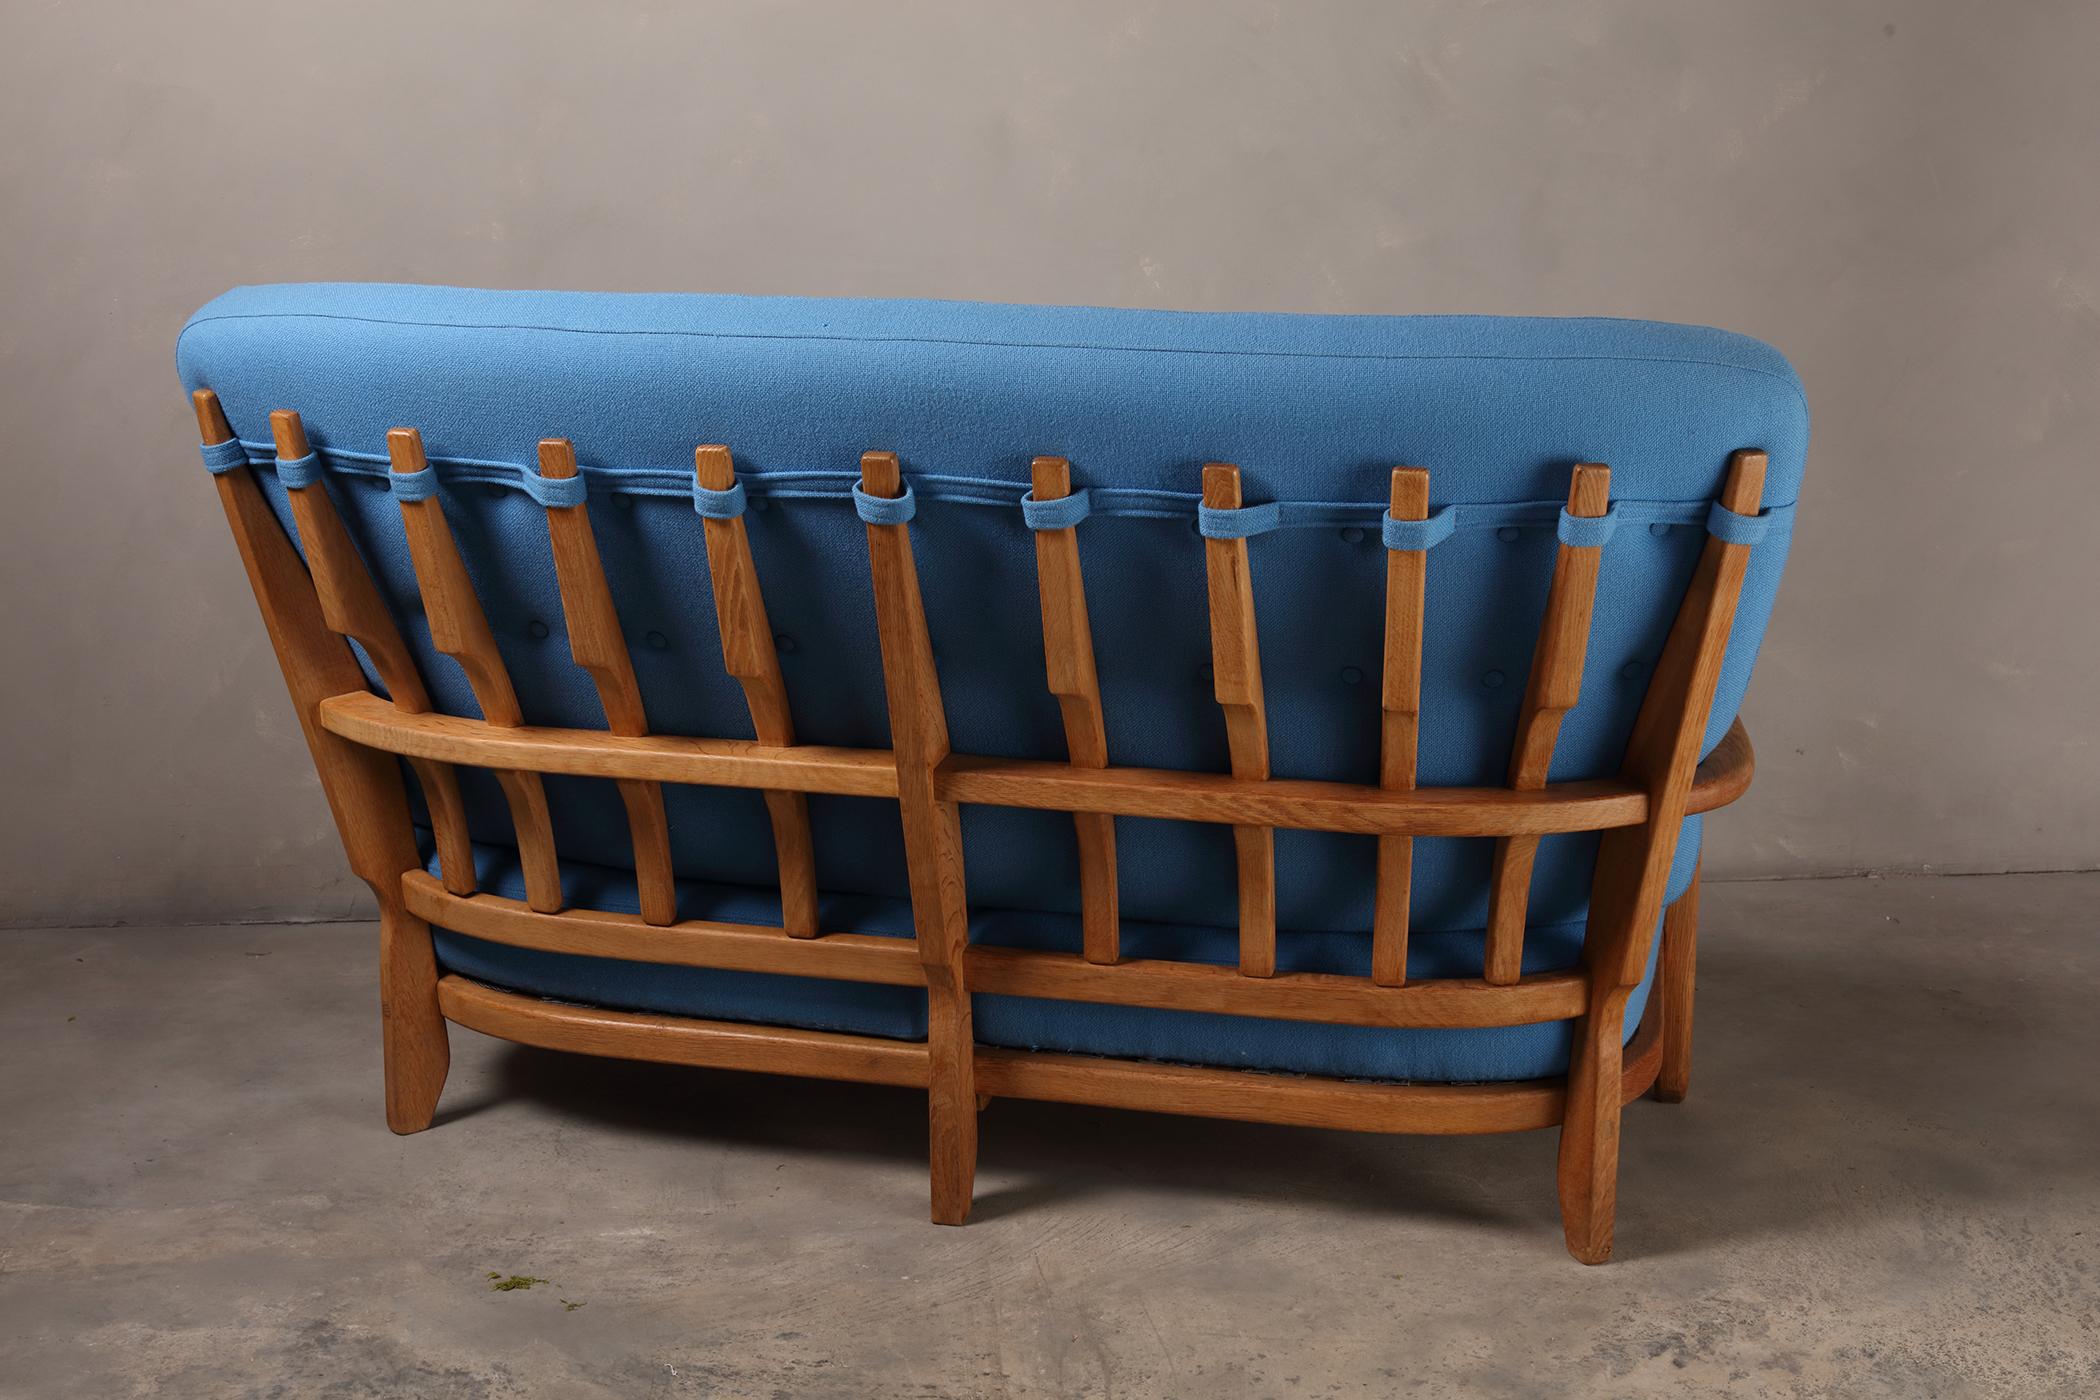 Sculptural carved oak settee is designed by Guillerme and Chambron. The design duo is known for their sculptural, crafted solid oak furniture. This comfortable sofa has an interesting open construction, featuring curved and diagonal lines. The